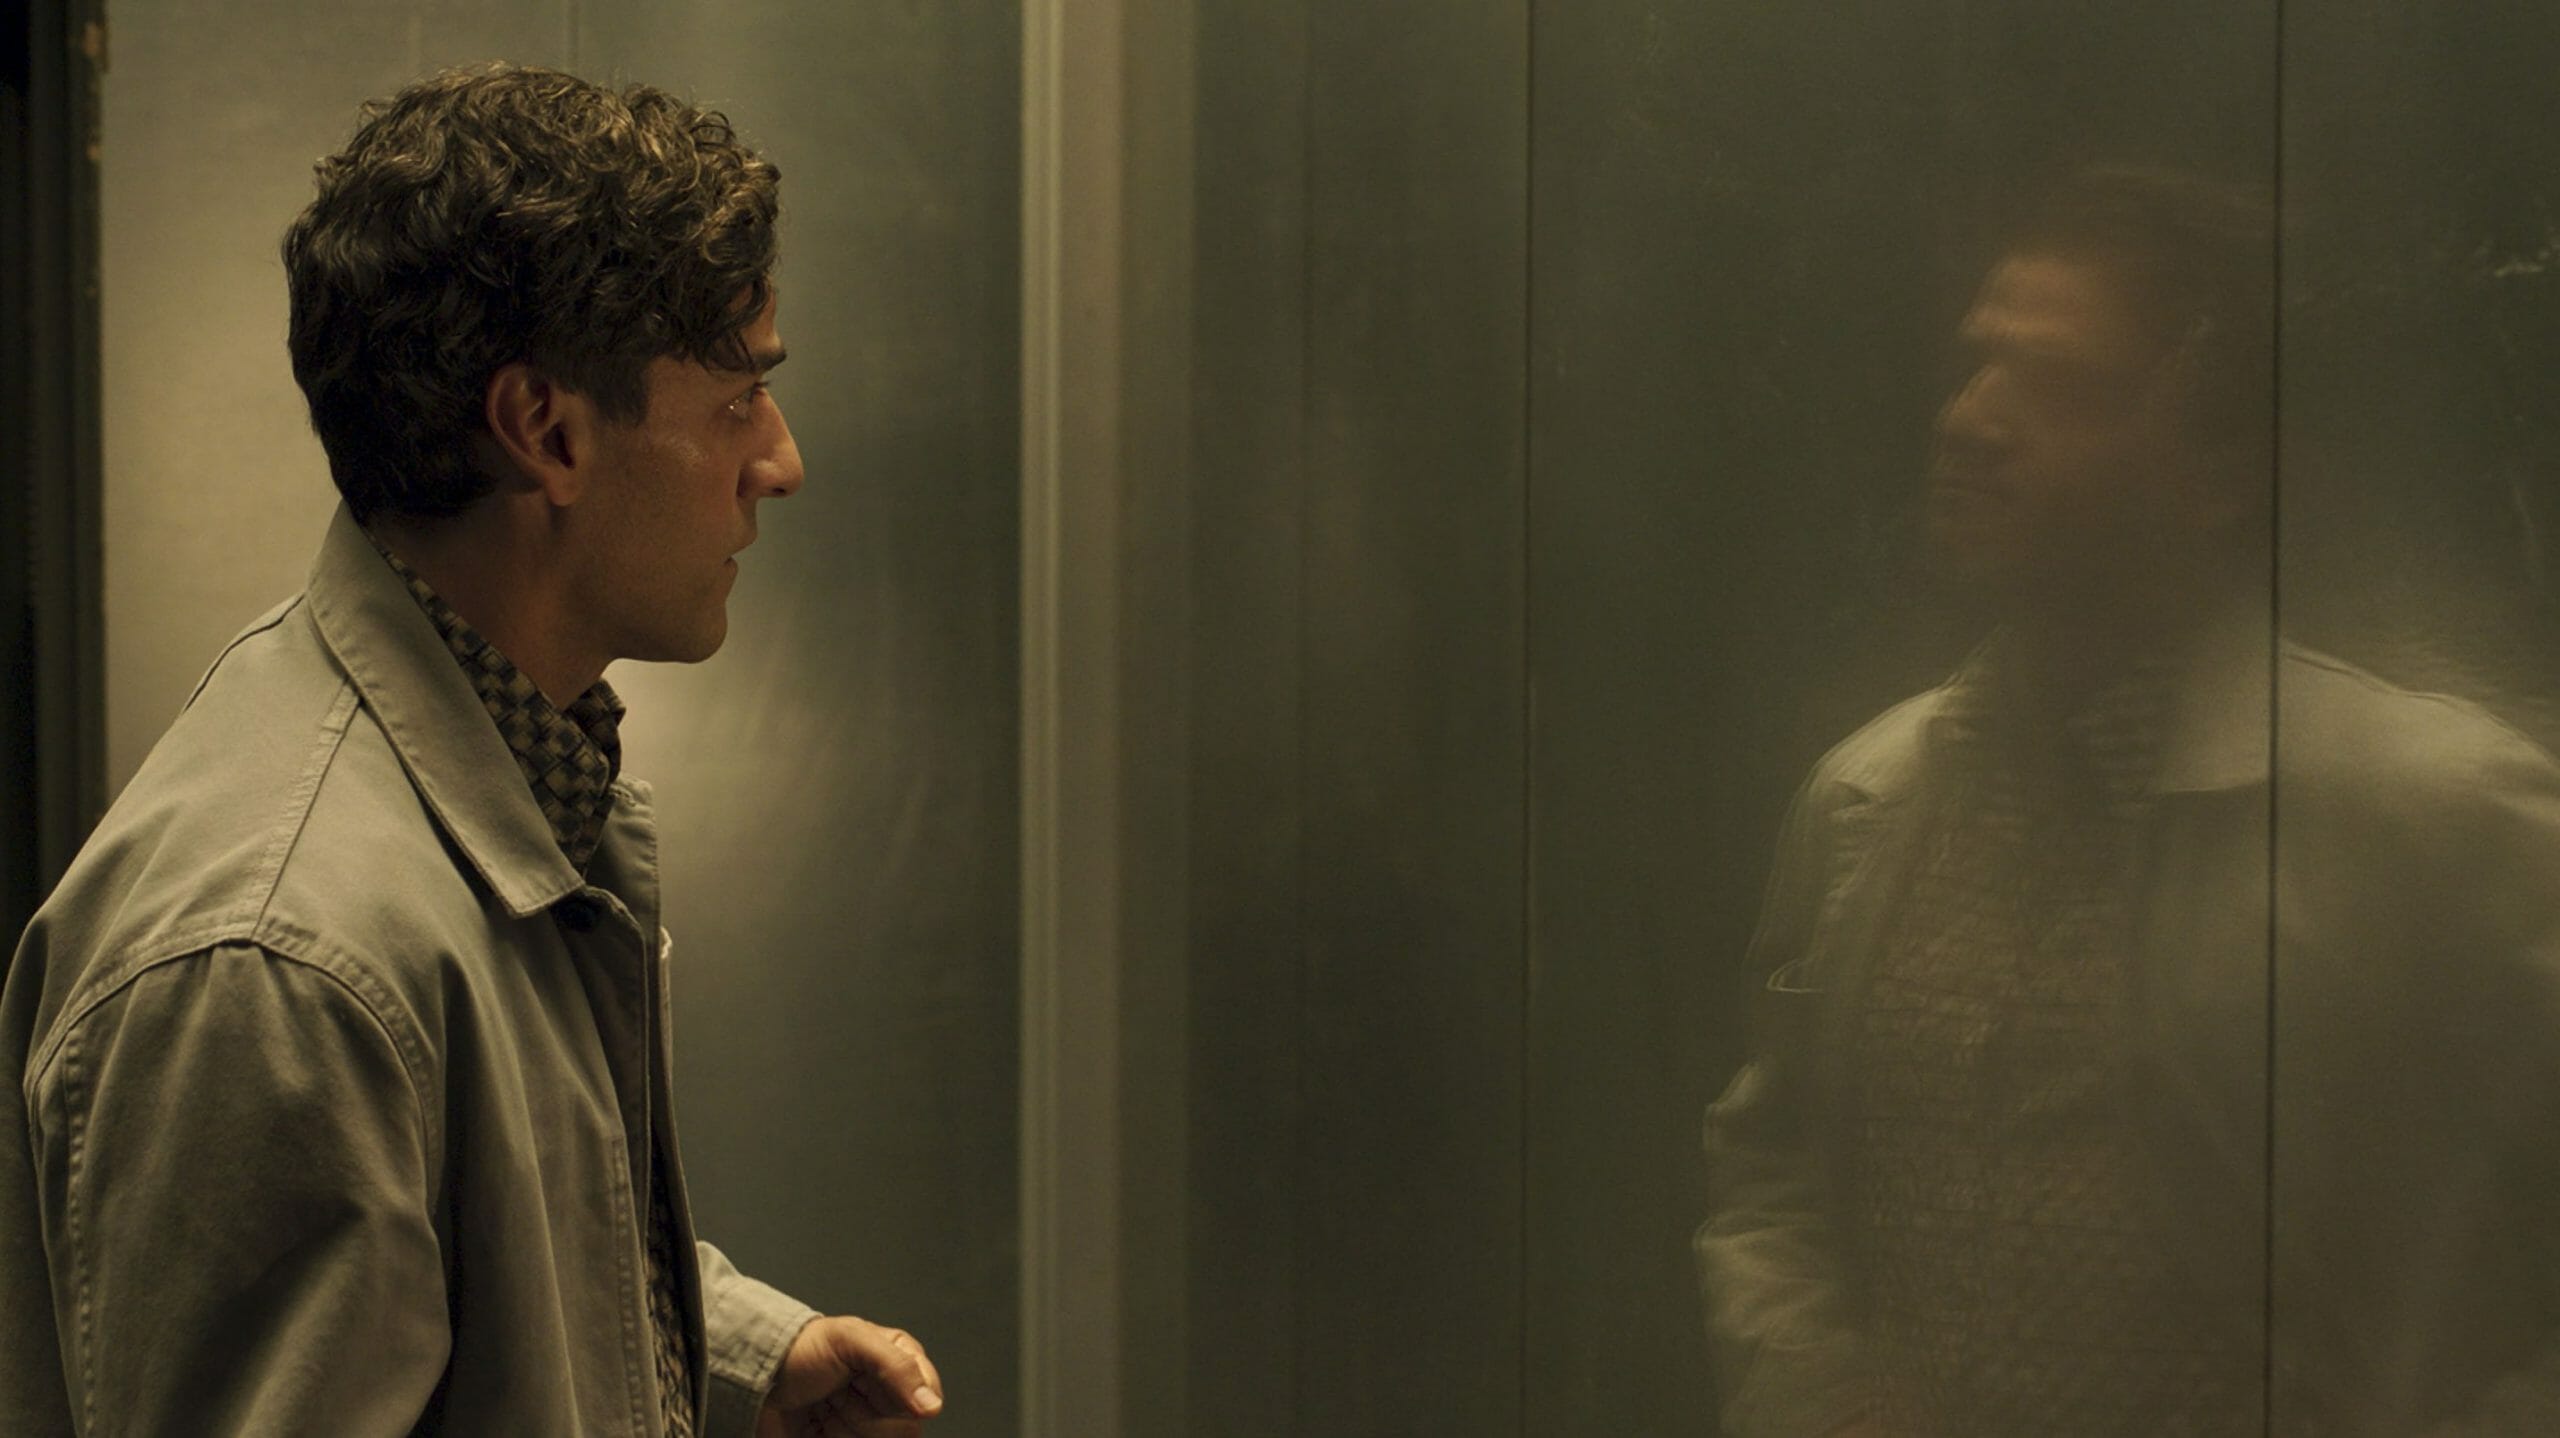 Oscar Isaac as Steven Grant stares at his reflection of his other identity Marc Spector on a shiny wall in the new Marvel Disney+ series MOON KNIGHT.  